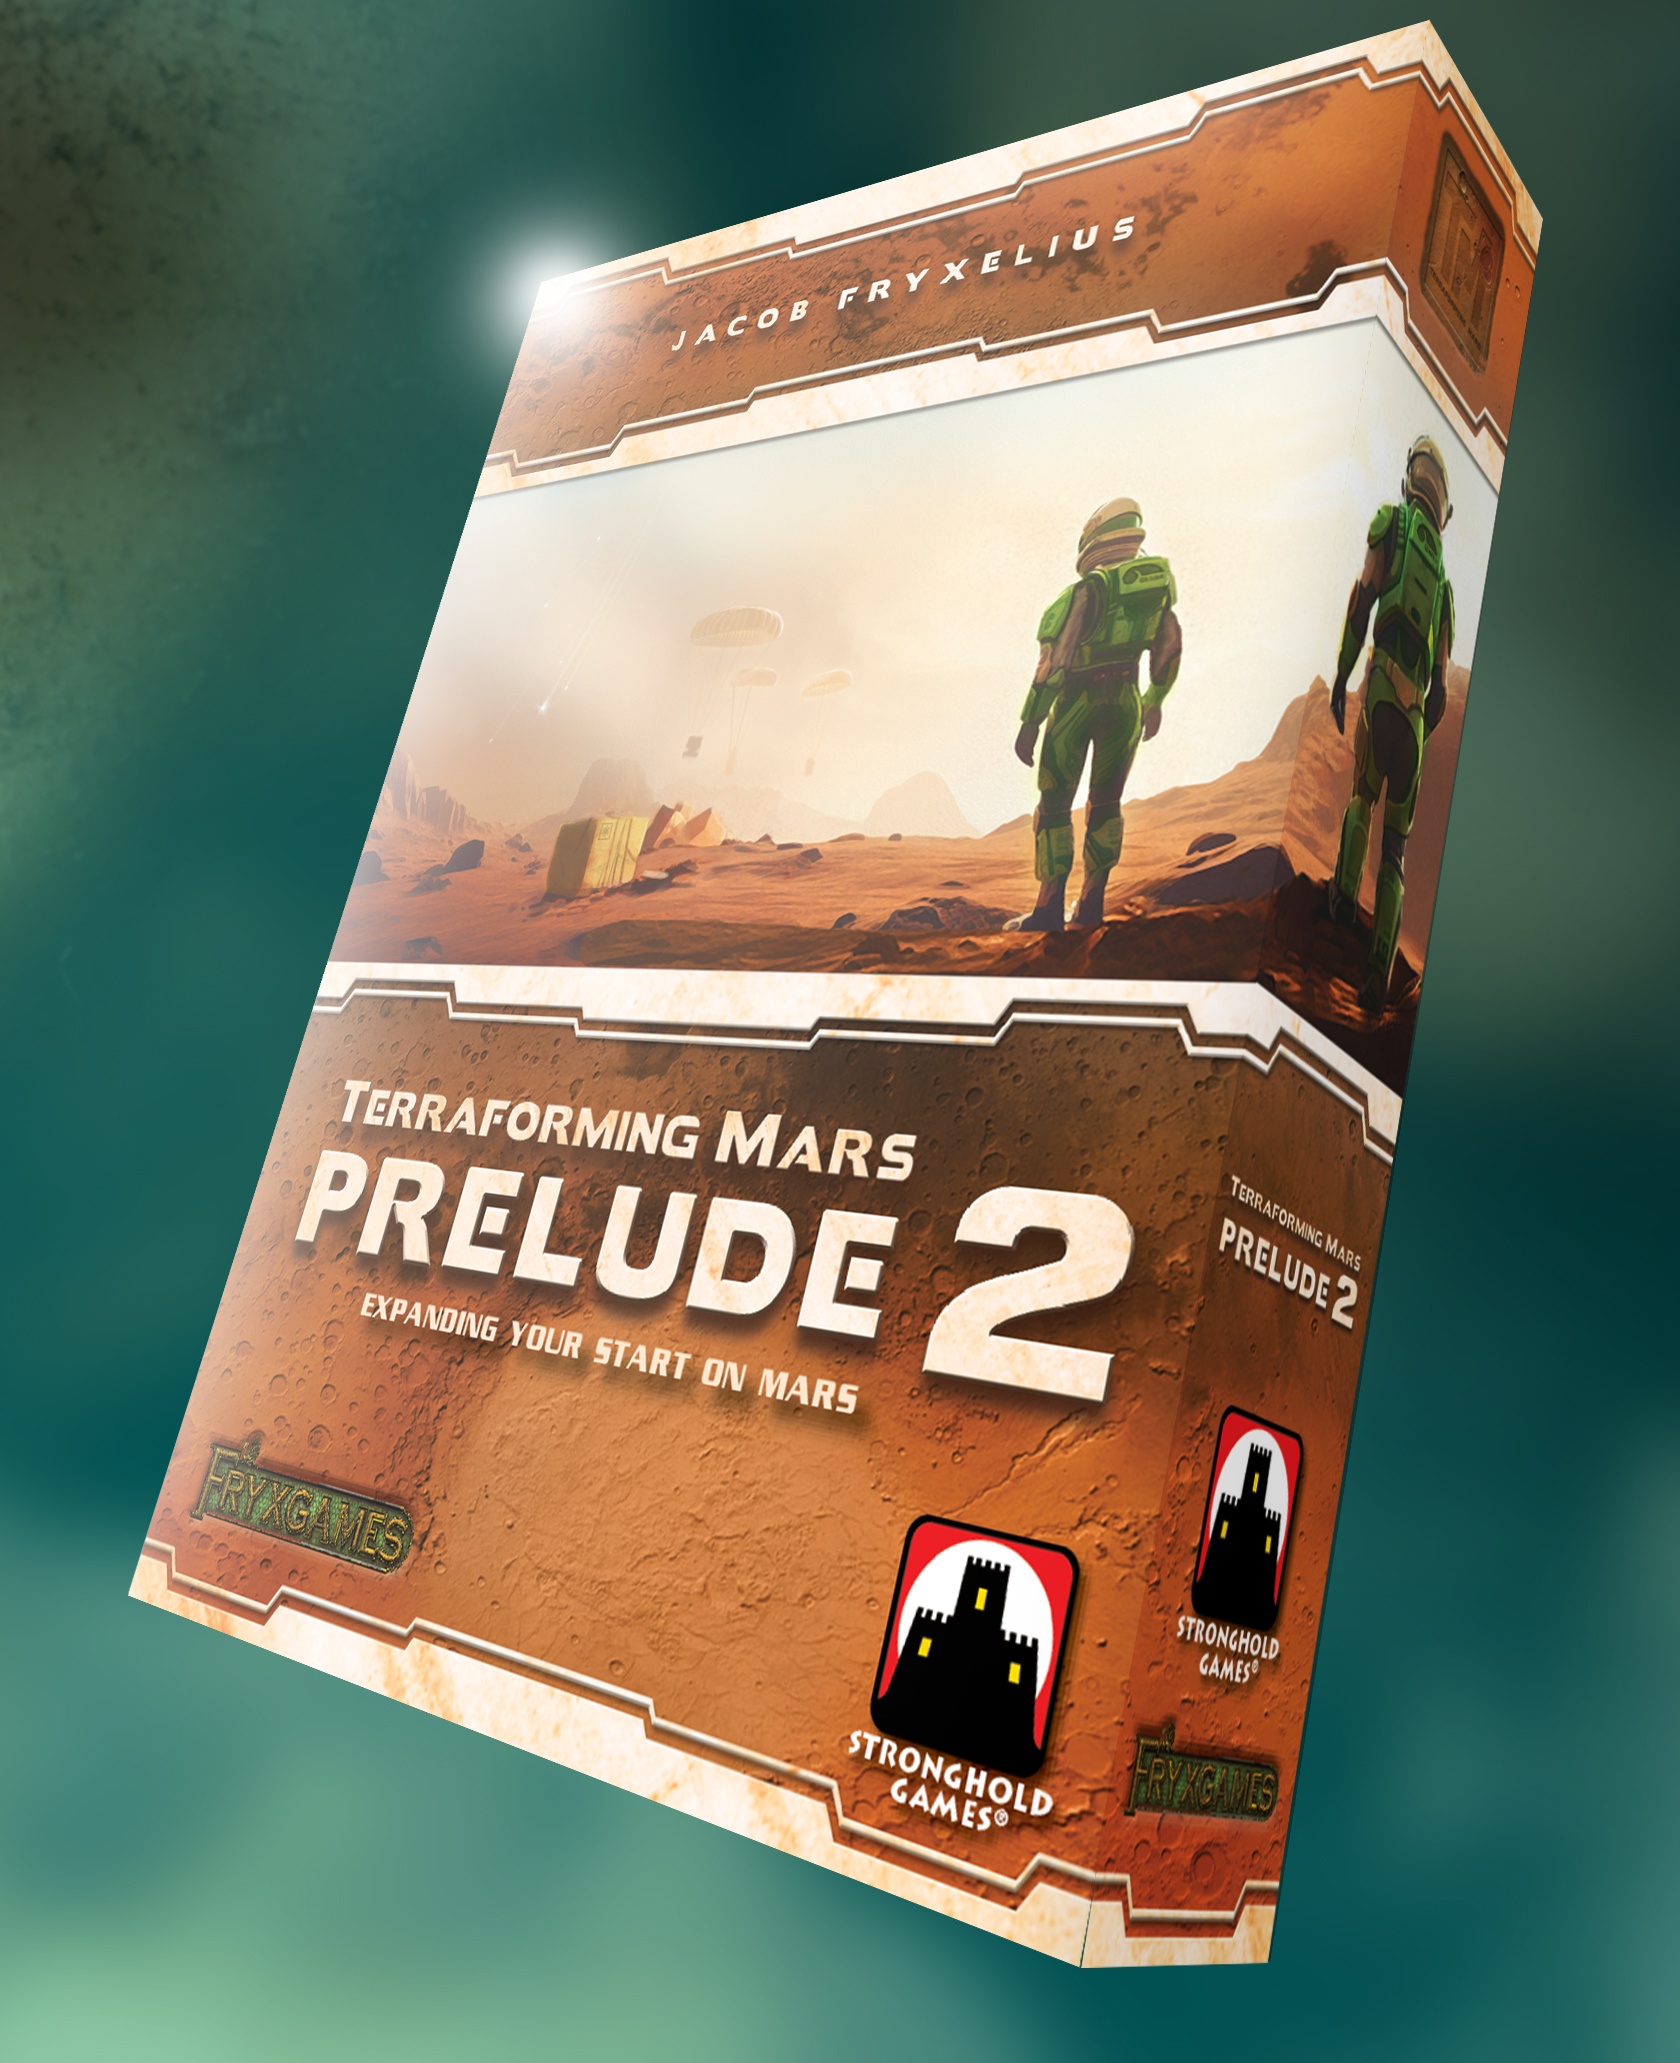 New Terraforming Mars expansion announced: Prelude 2